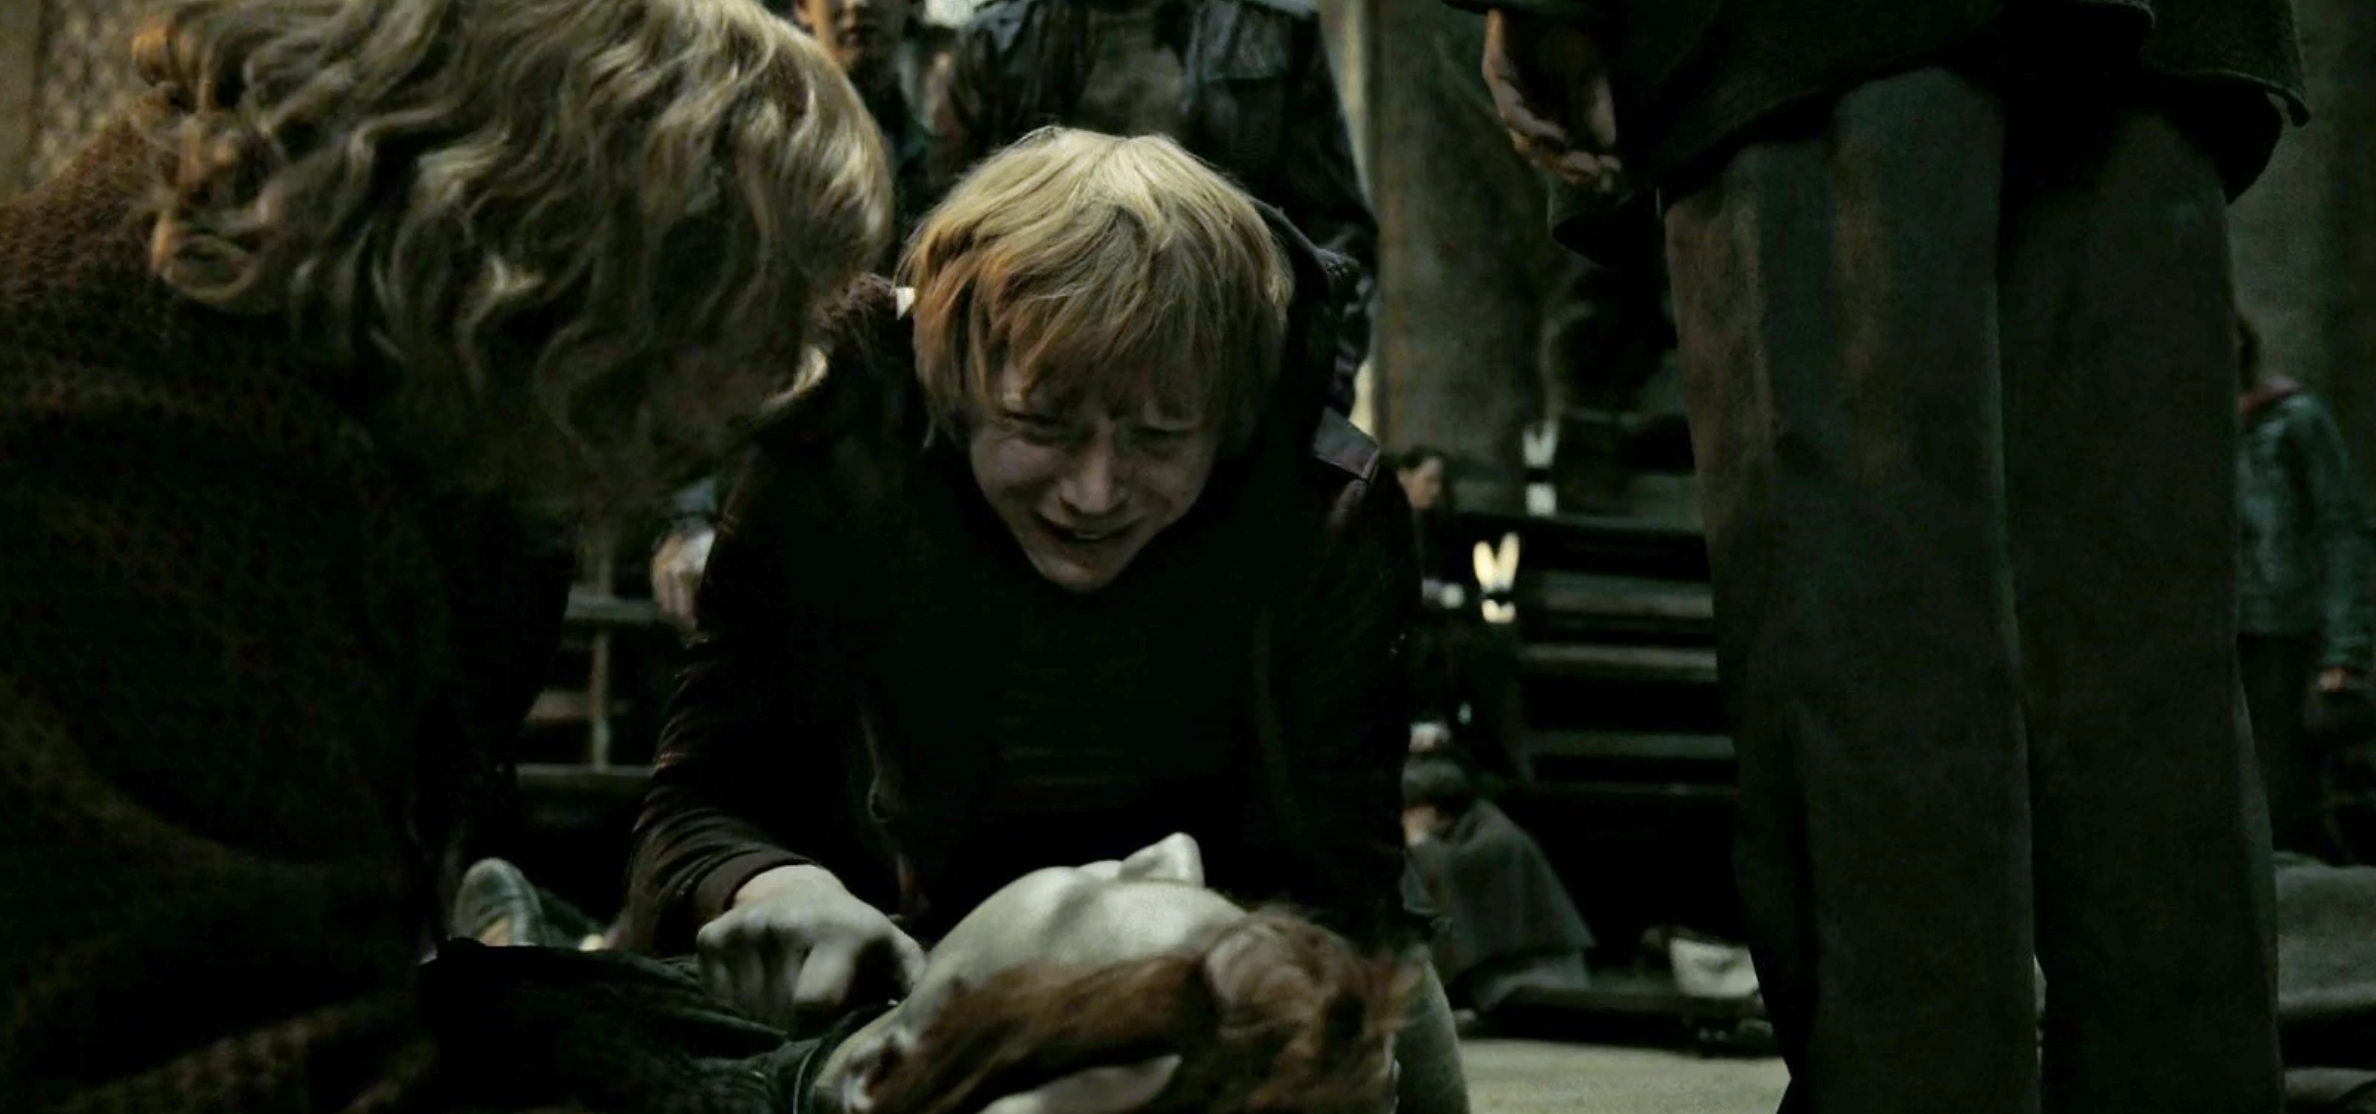 Ron cradling Fred&#x27;s body in Harry Potter and the Deathly Hallows Part II